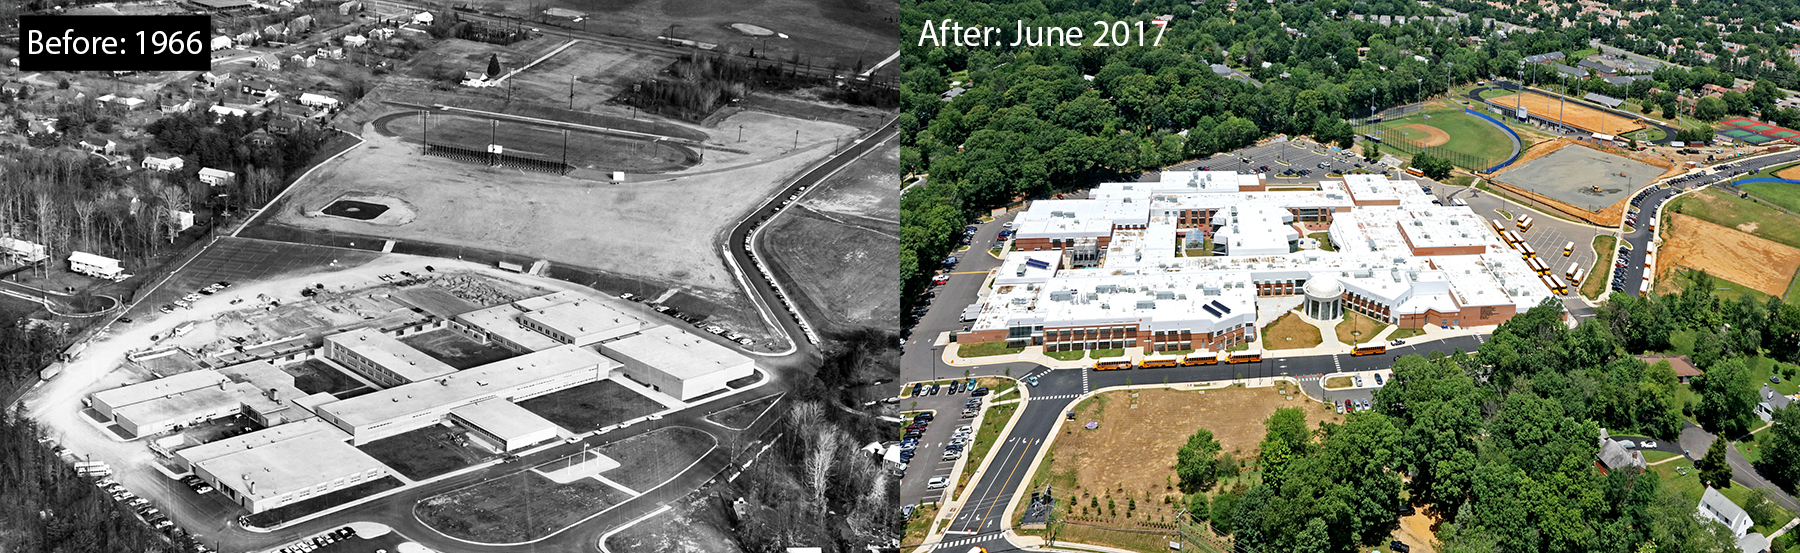 areal photo of TJ in 1966 on the left and in 2017 on the right